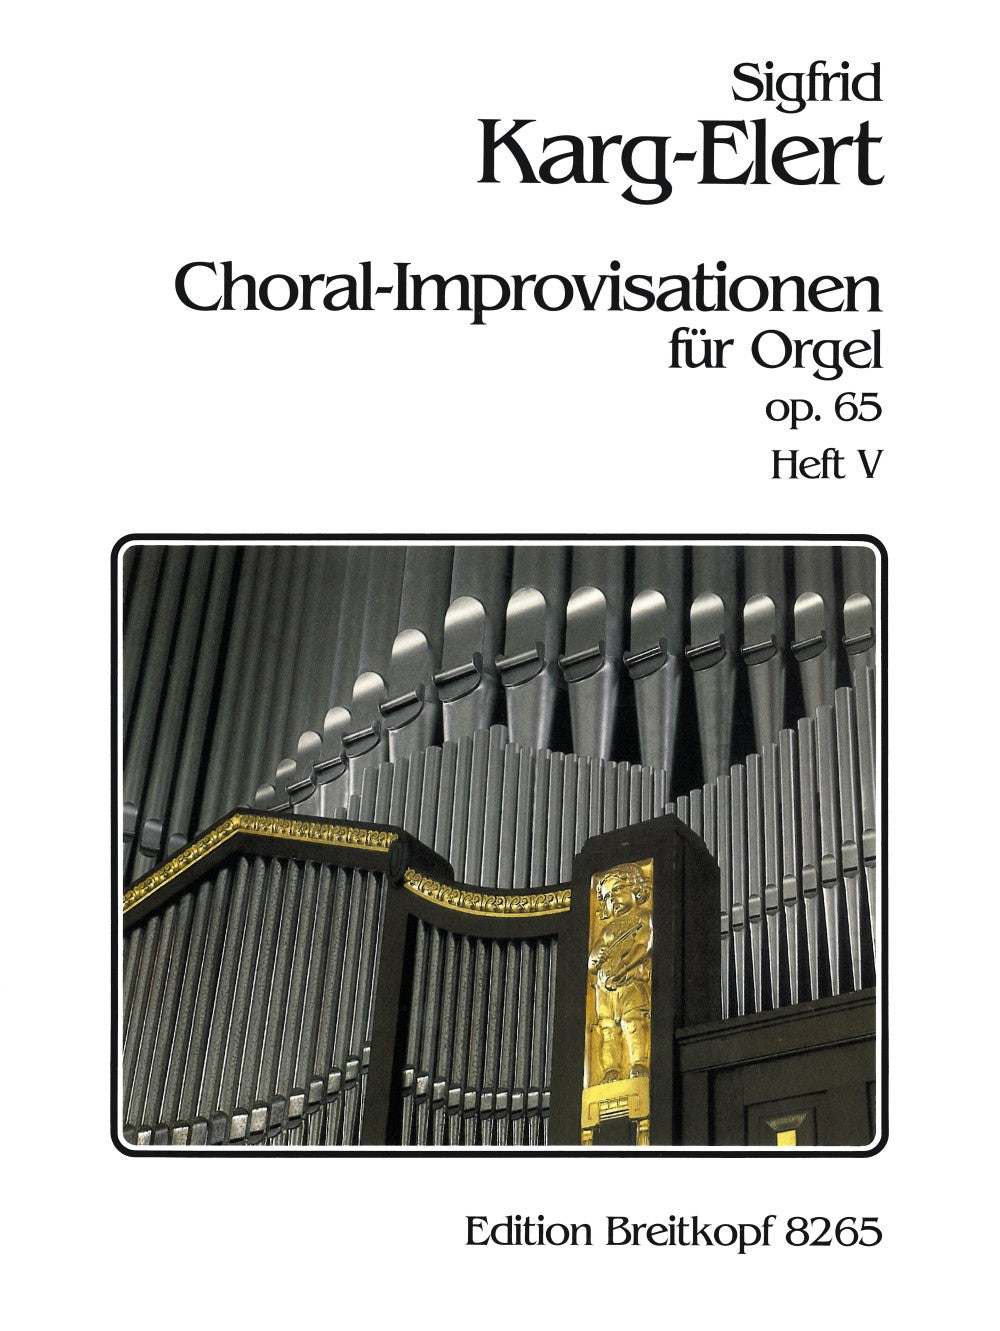 Karg-Elert: 66 Chorale Improvisations, Op. 65 - Volume 5 (Reformation Day, Day of Repentance, Holy Communion, Memorial Day)